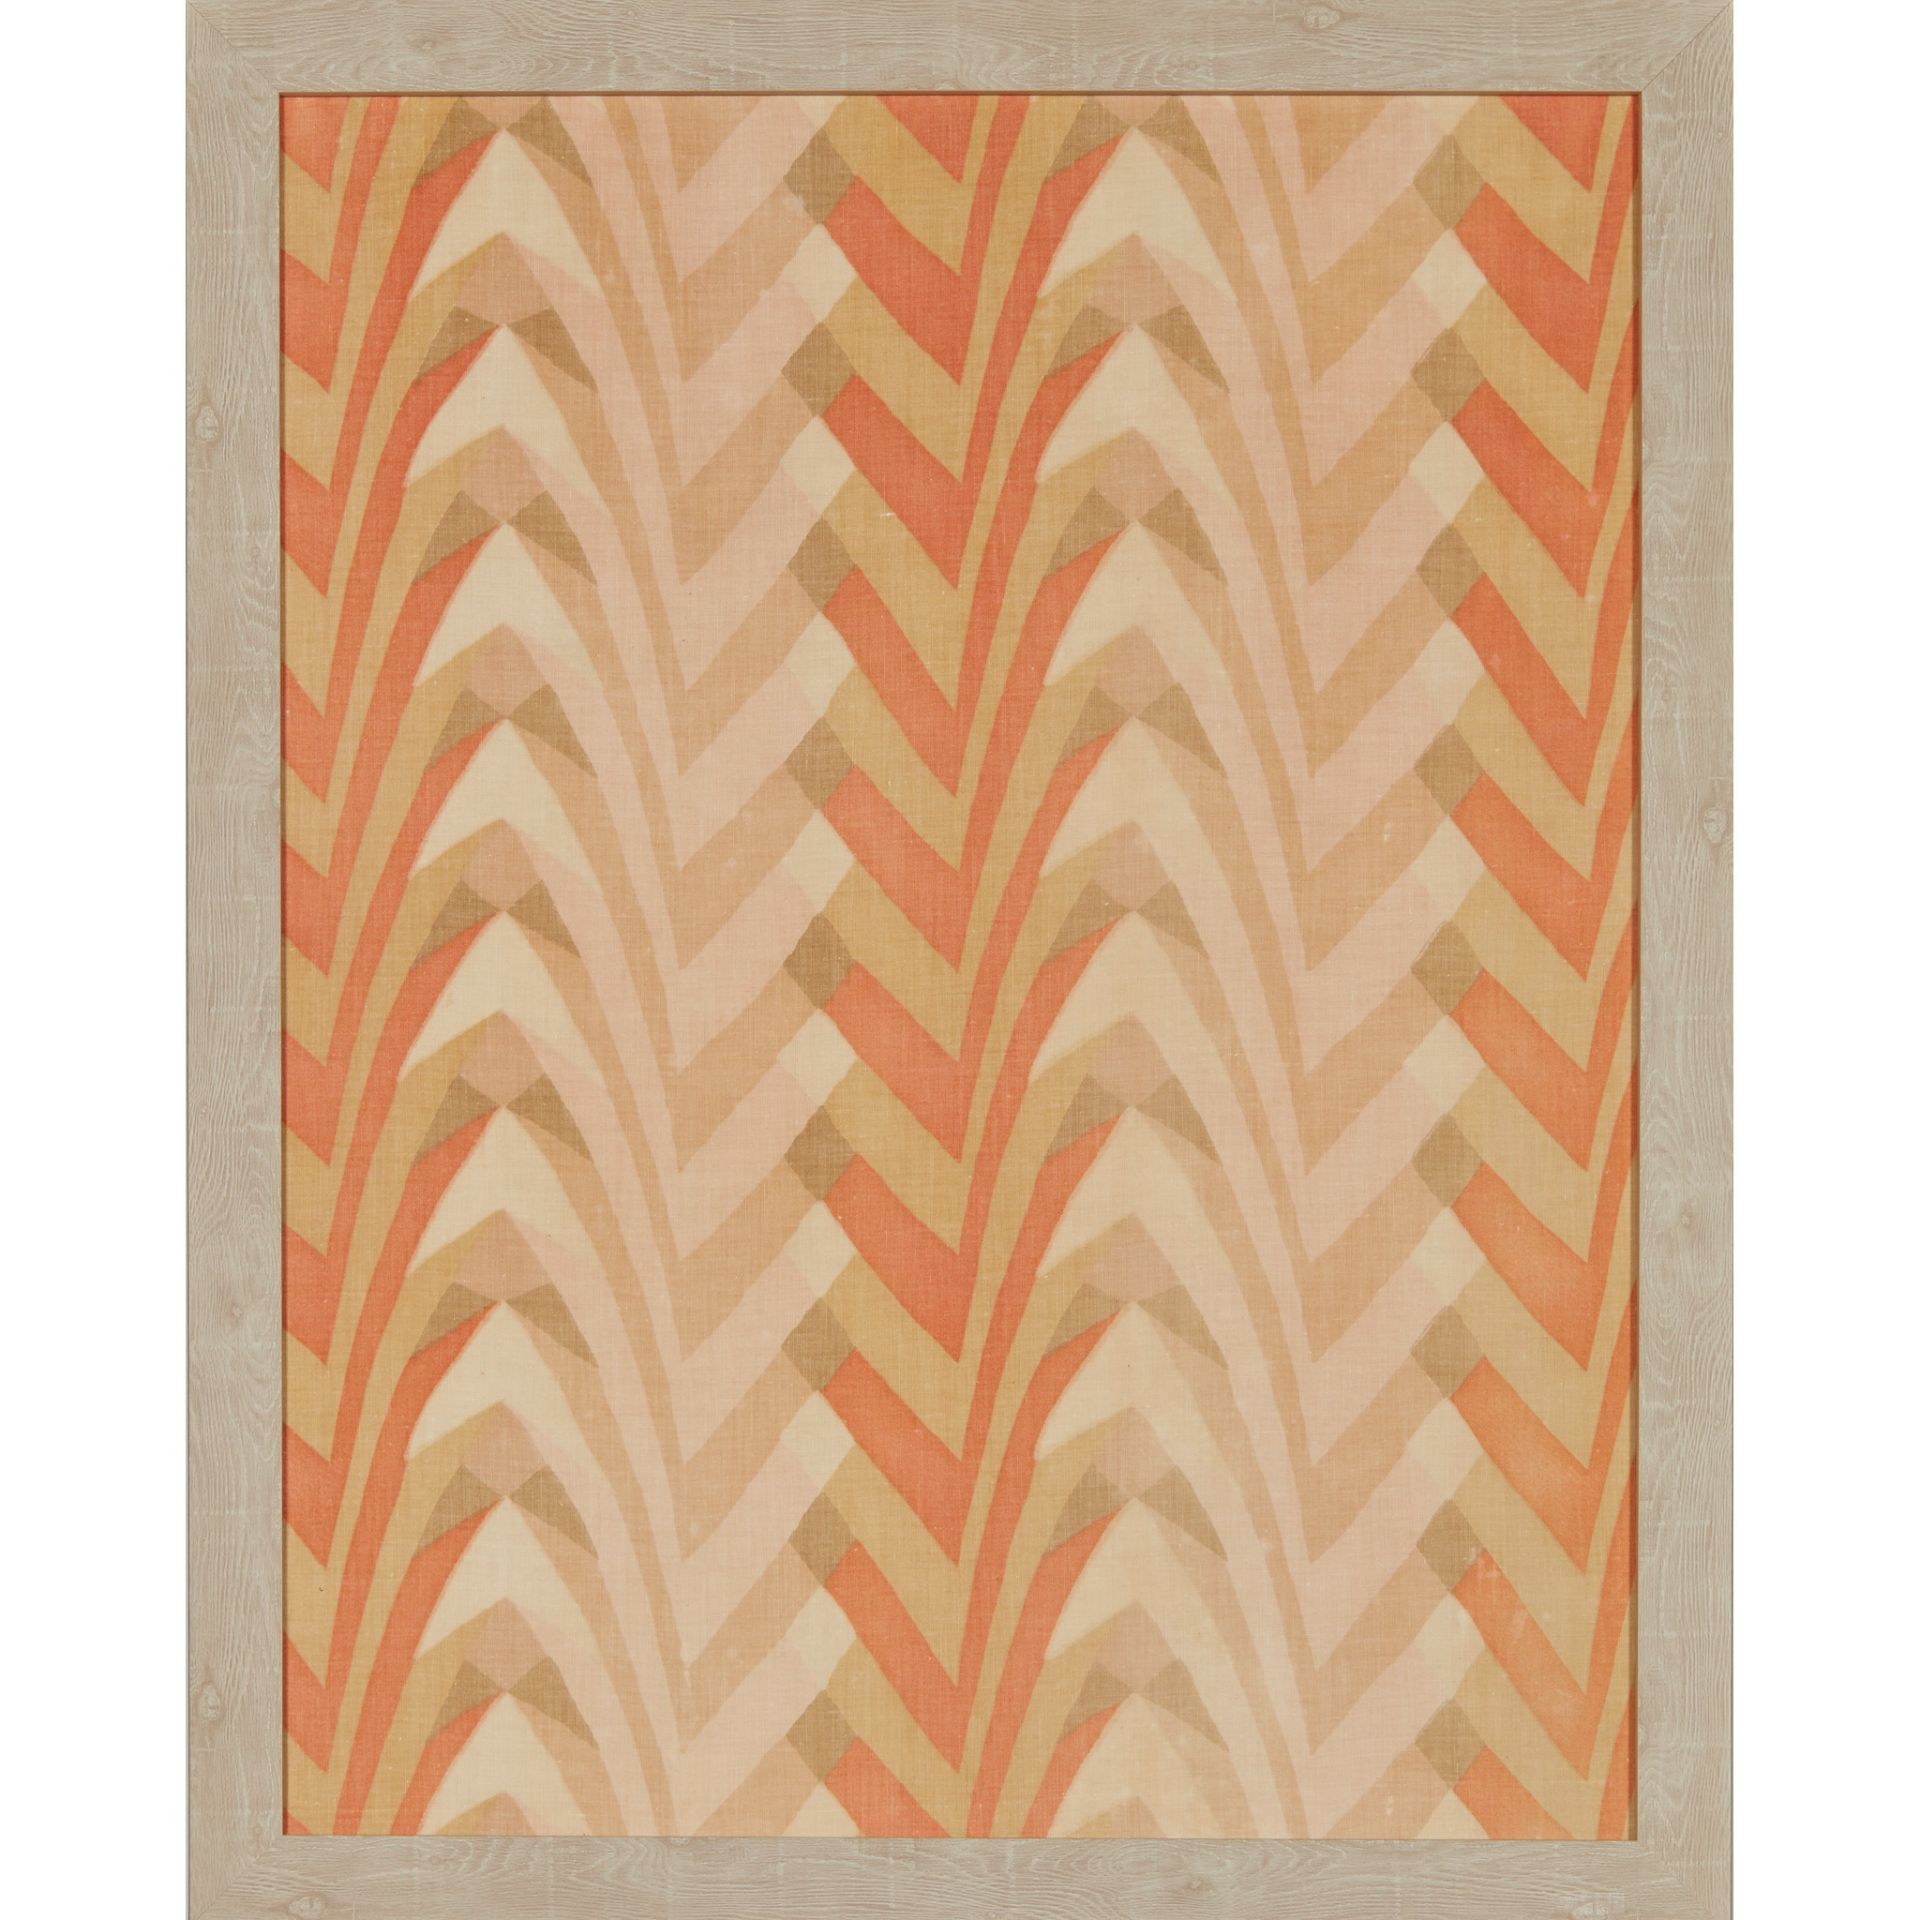 F. GREGORY BROWN (1887-1941) FOR WILLIAM FOXTON LTD. FRAMED FABRIC PANEL, CIRCA 1922 - Image 2 of 3